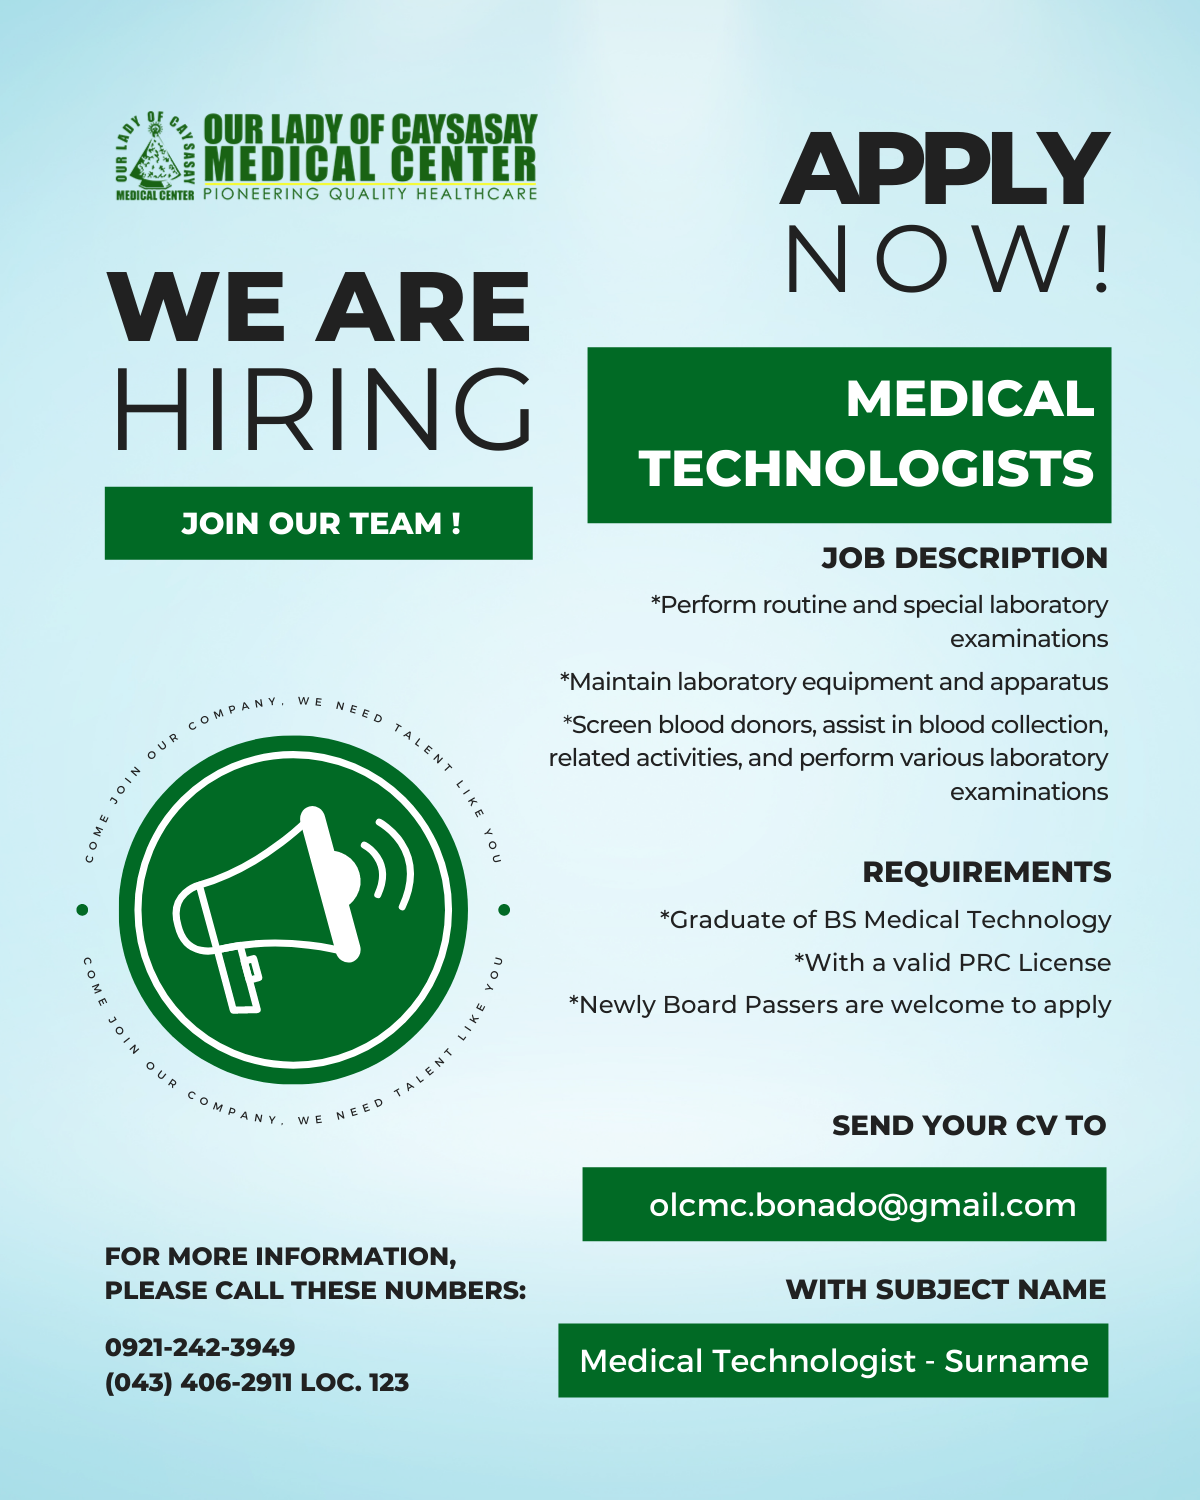 careers-medical-technologist